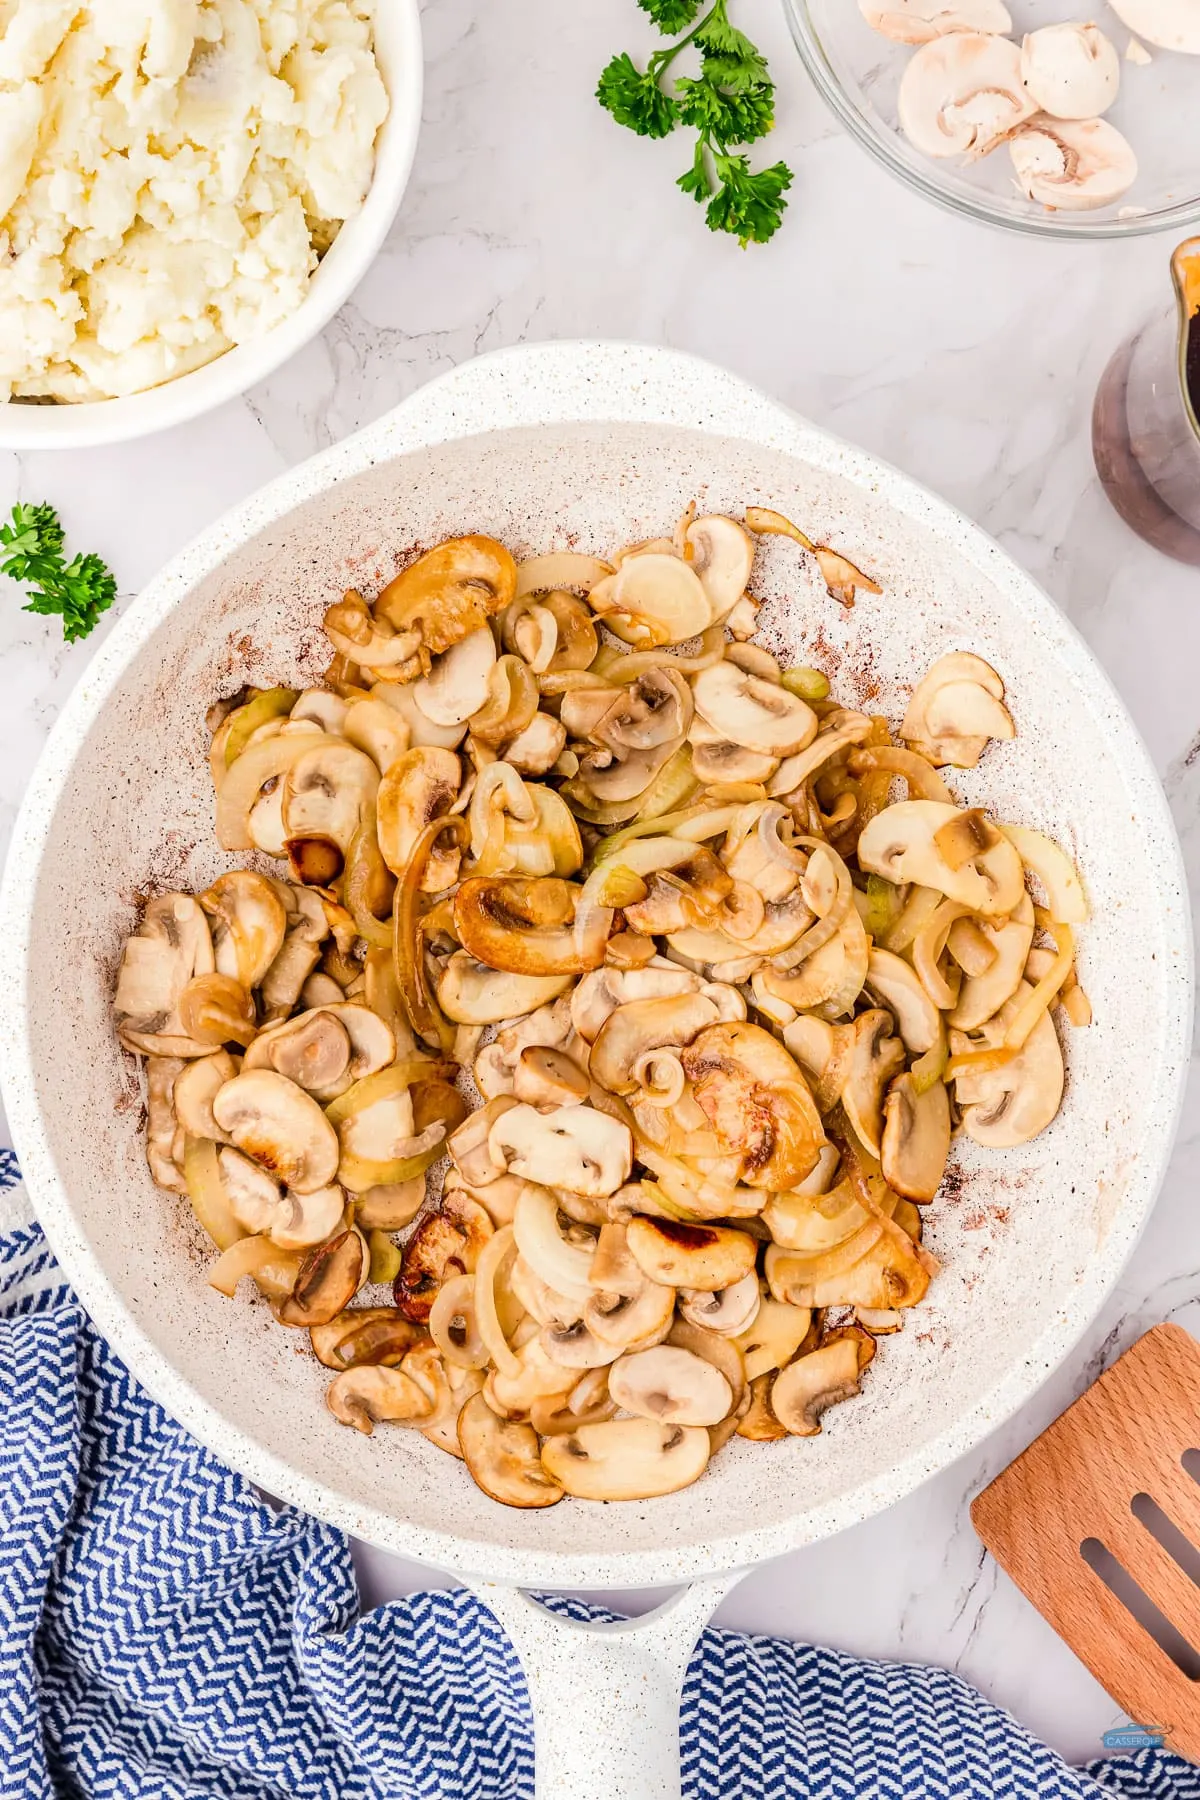 cooked golden mushrooms for salisbury steak casserole fill hungry tummies